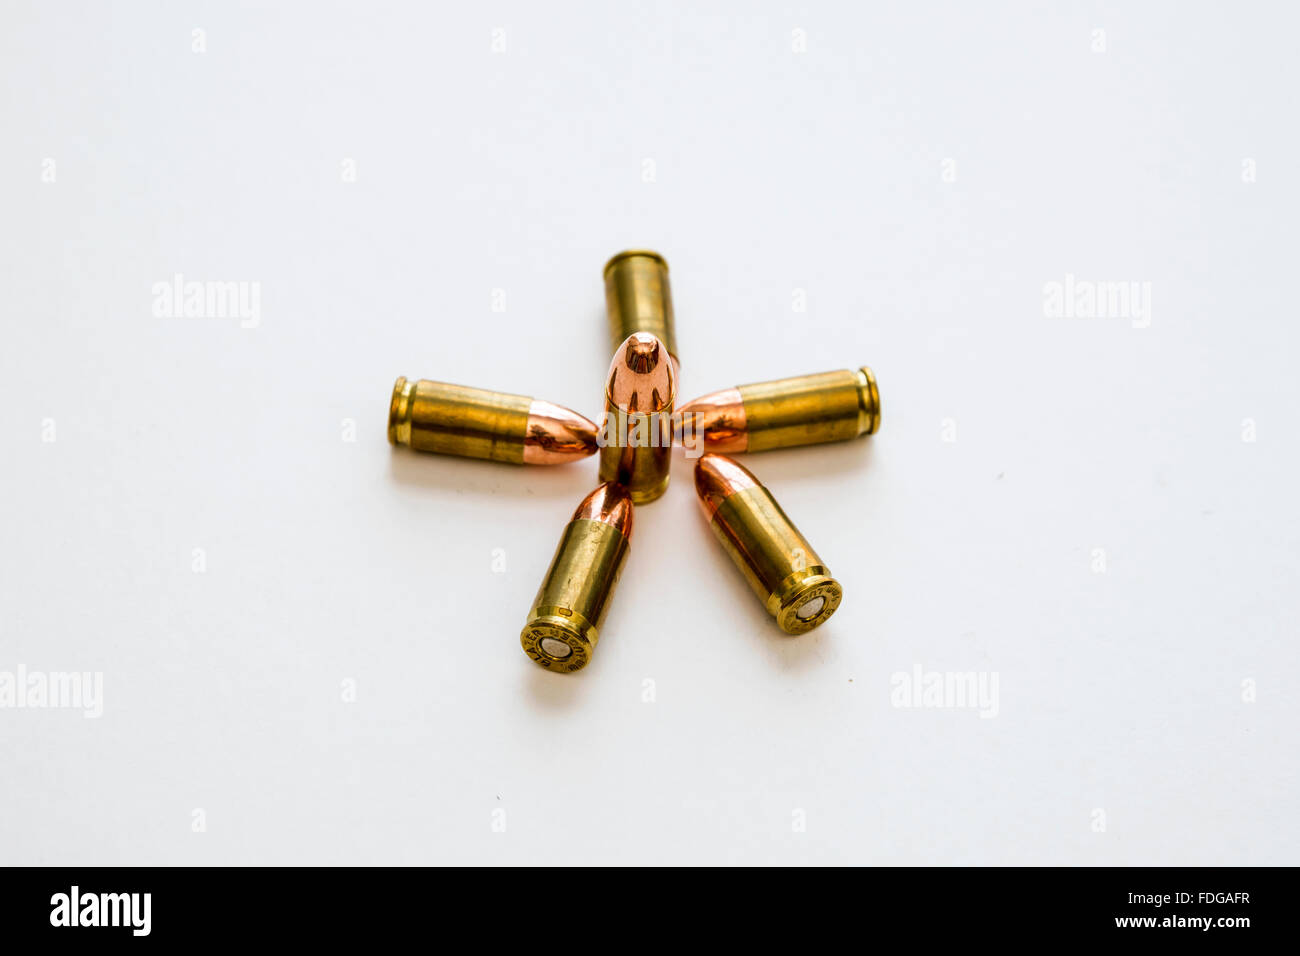 https://c8.alamy.com/comp/FDGAFR/five-pointed-star-created-from-bullets-FDGAFR.jpg